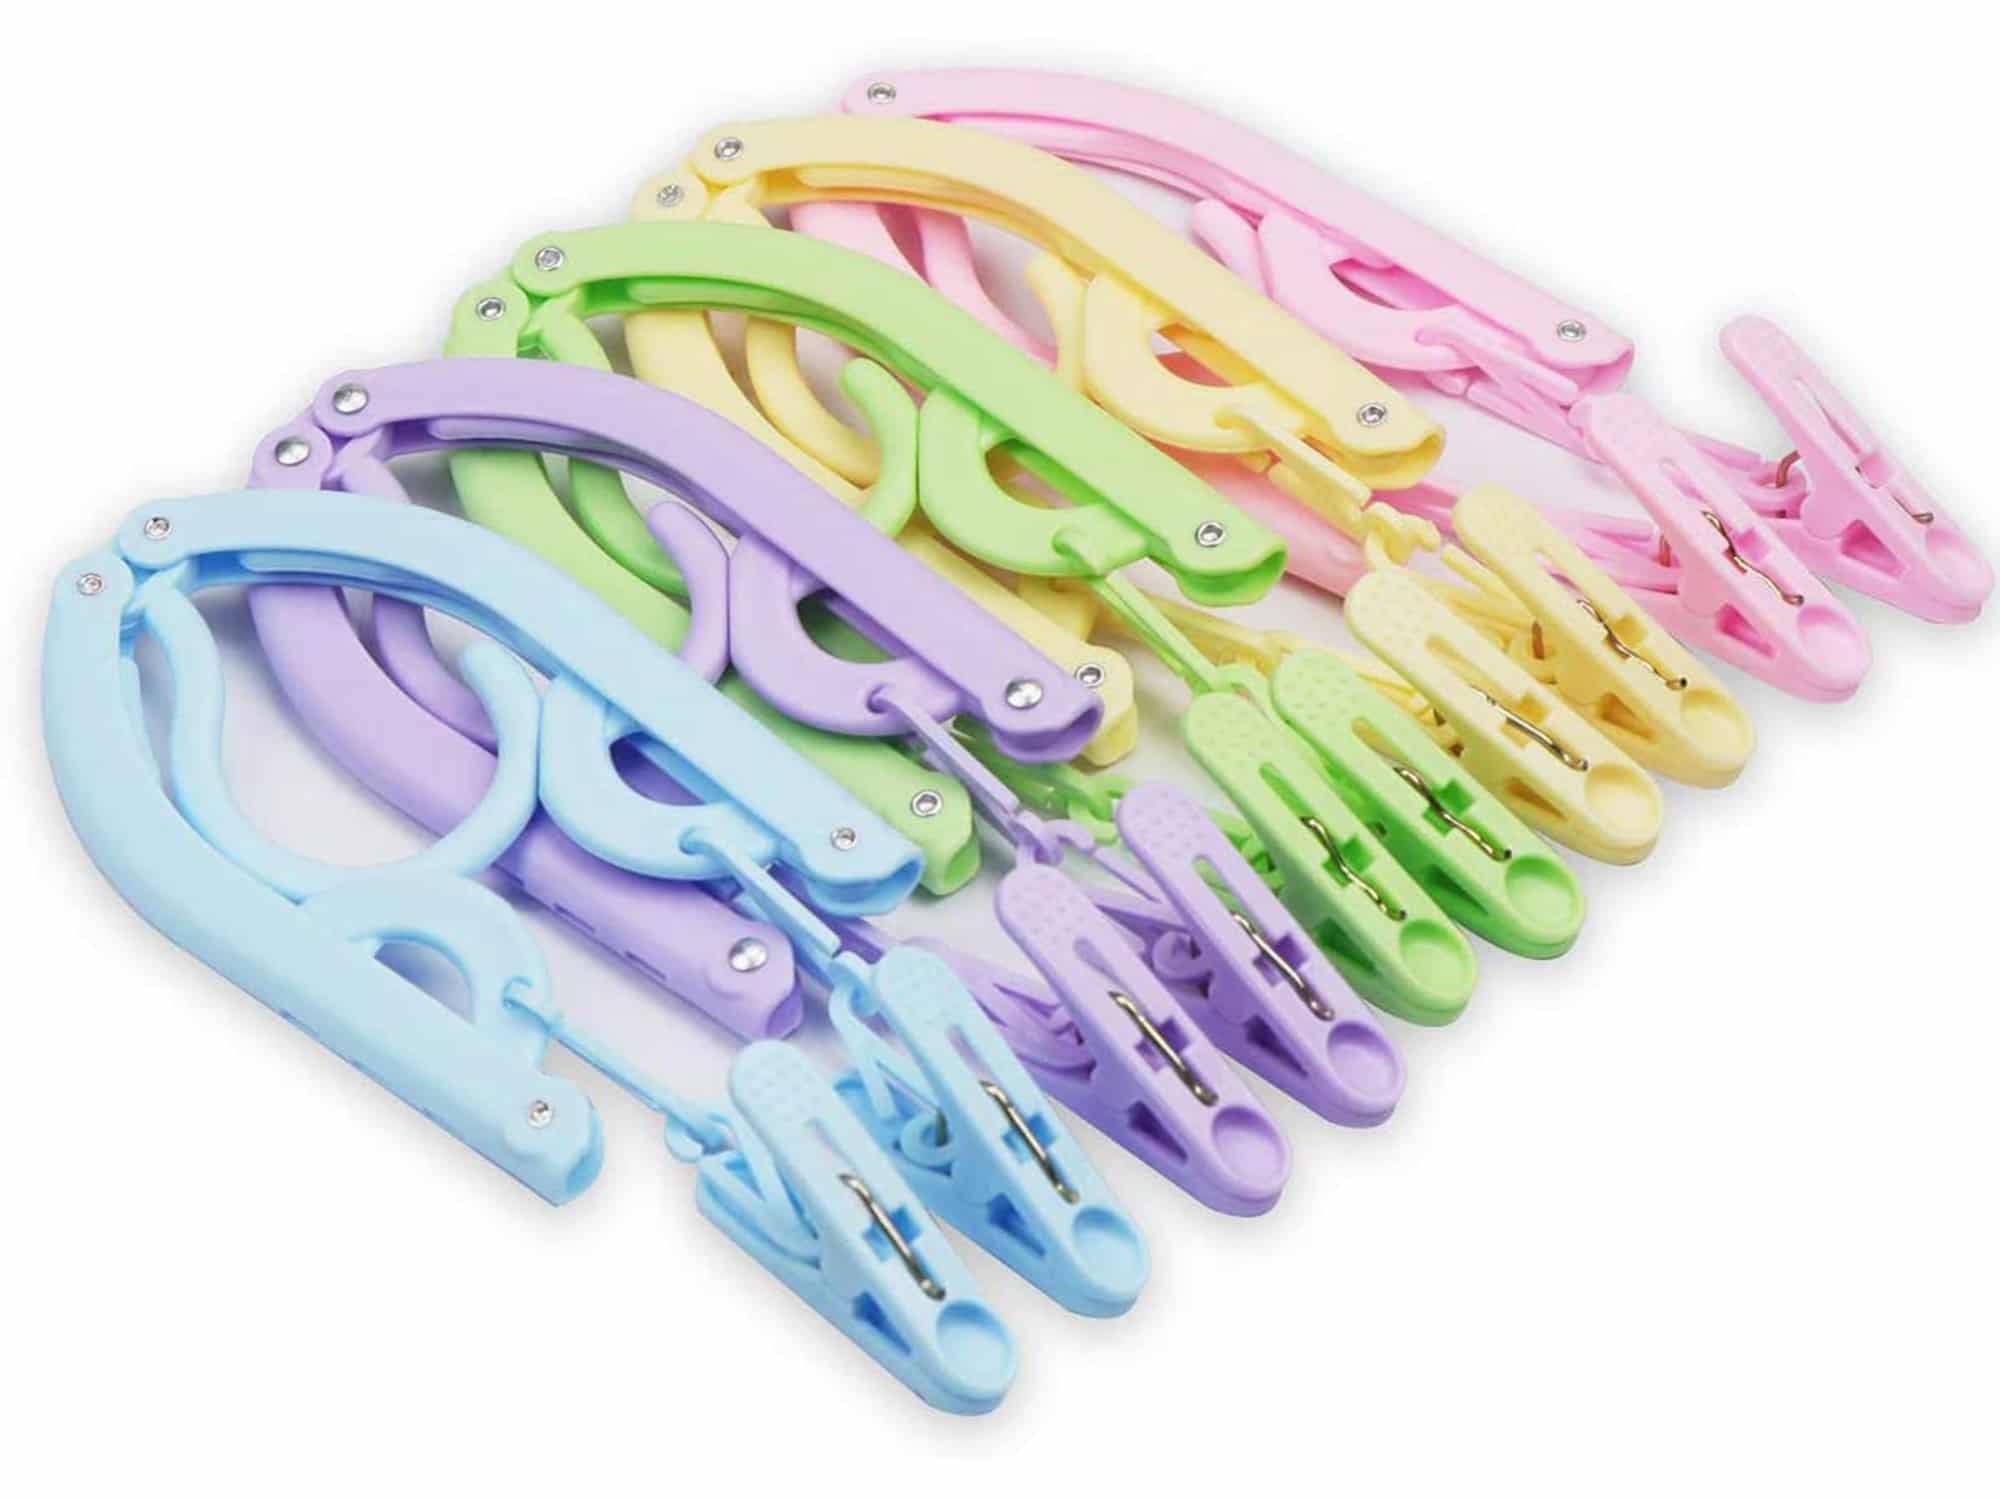 colorful hangers